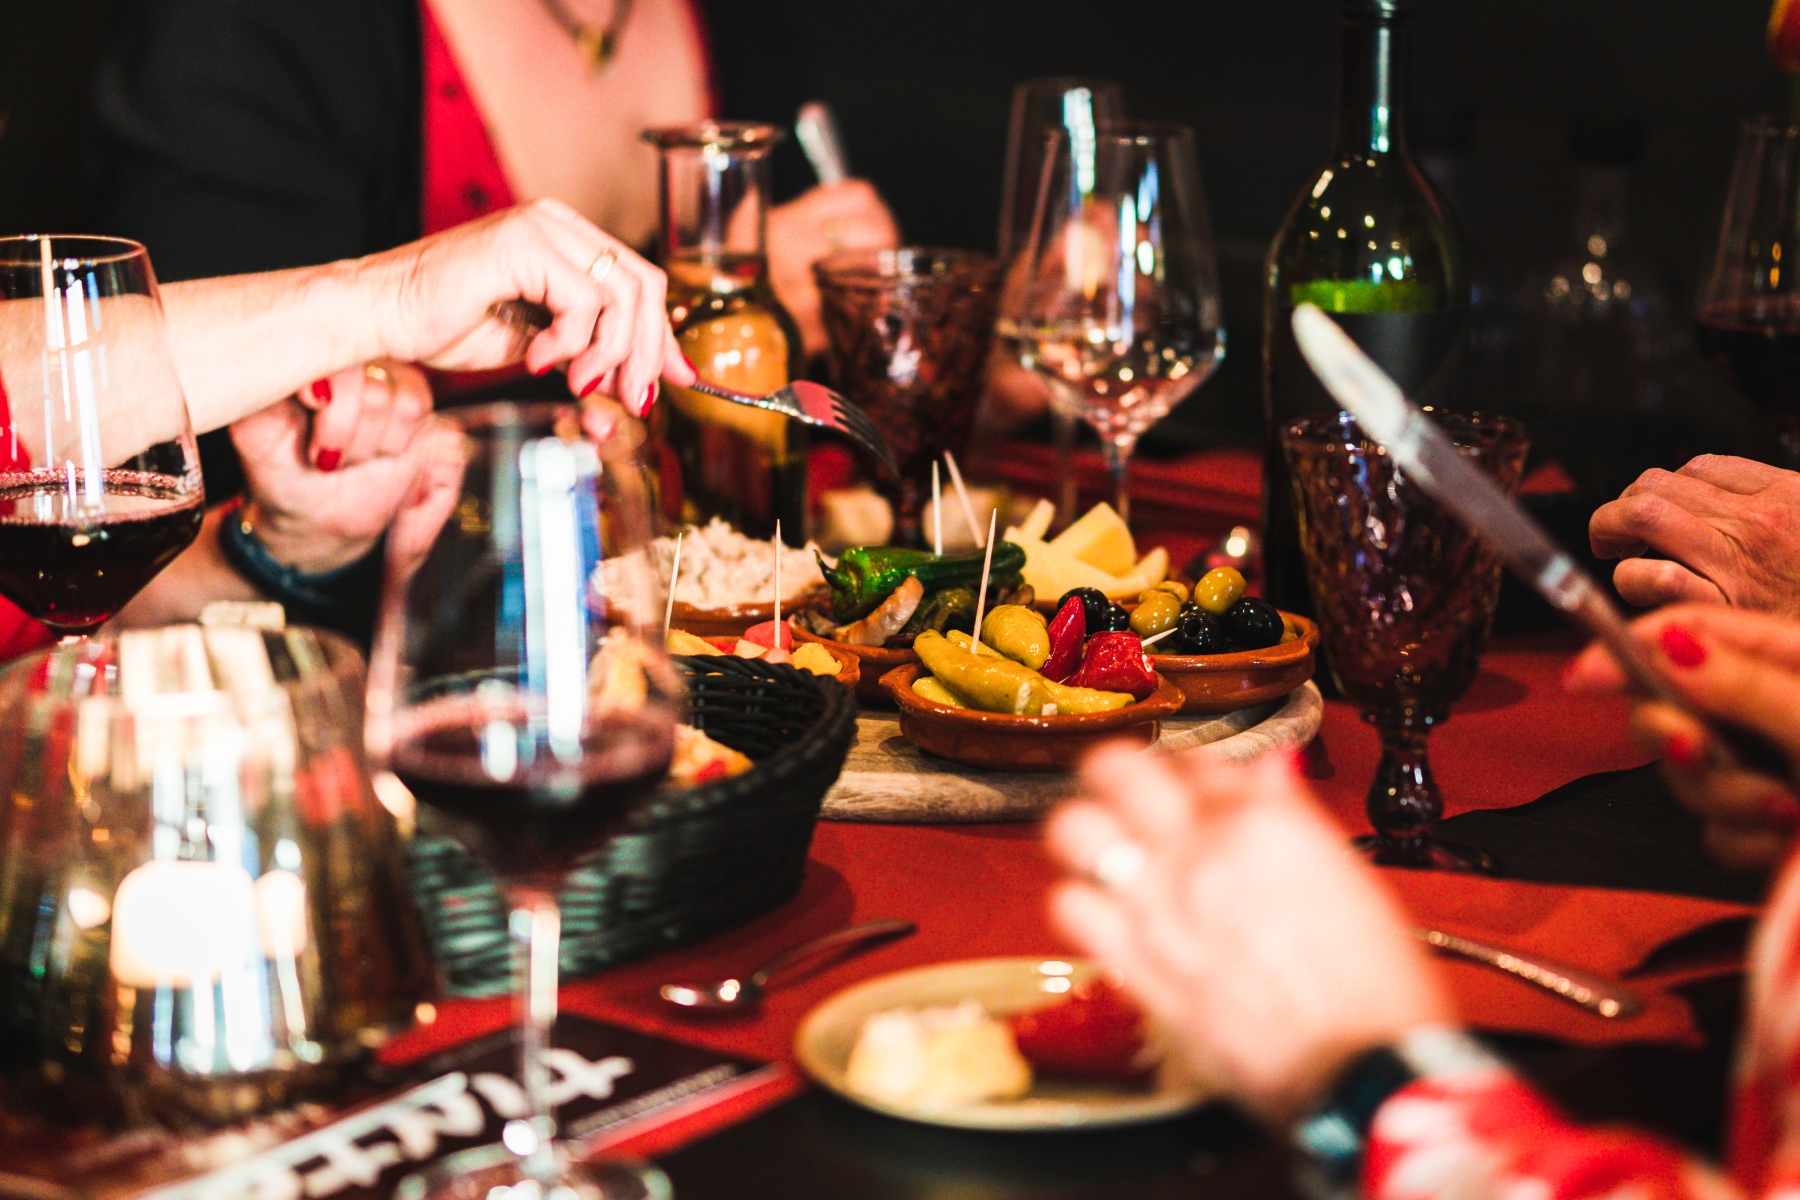 a close-up shot of friends eating tapas around a table with wine glasses placed next to the dishes